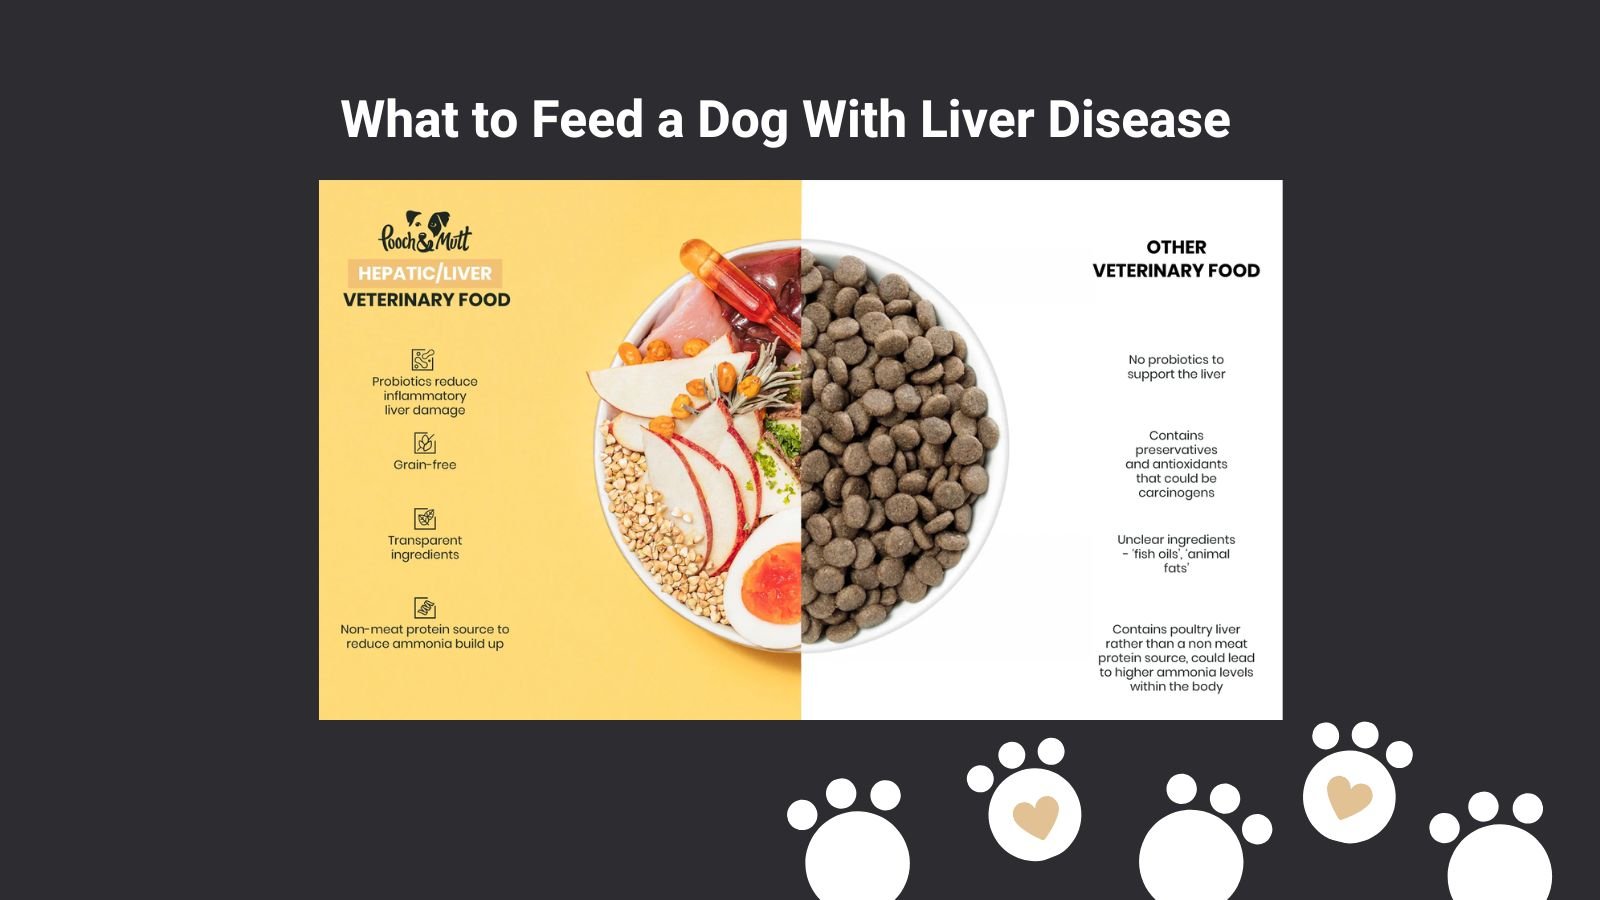 What to Feed a Dog With Liver Disease